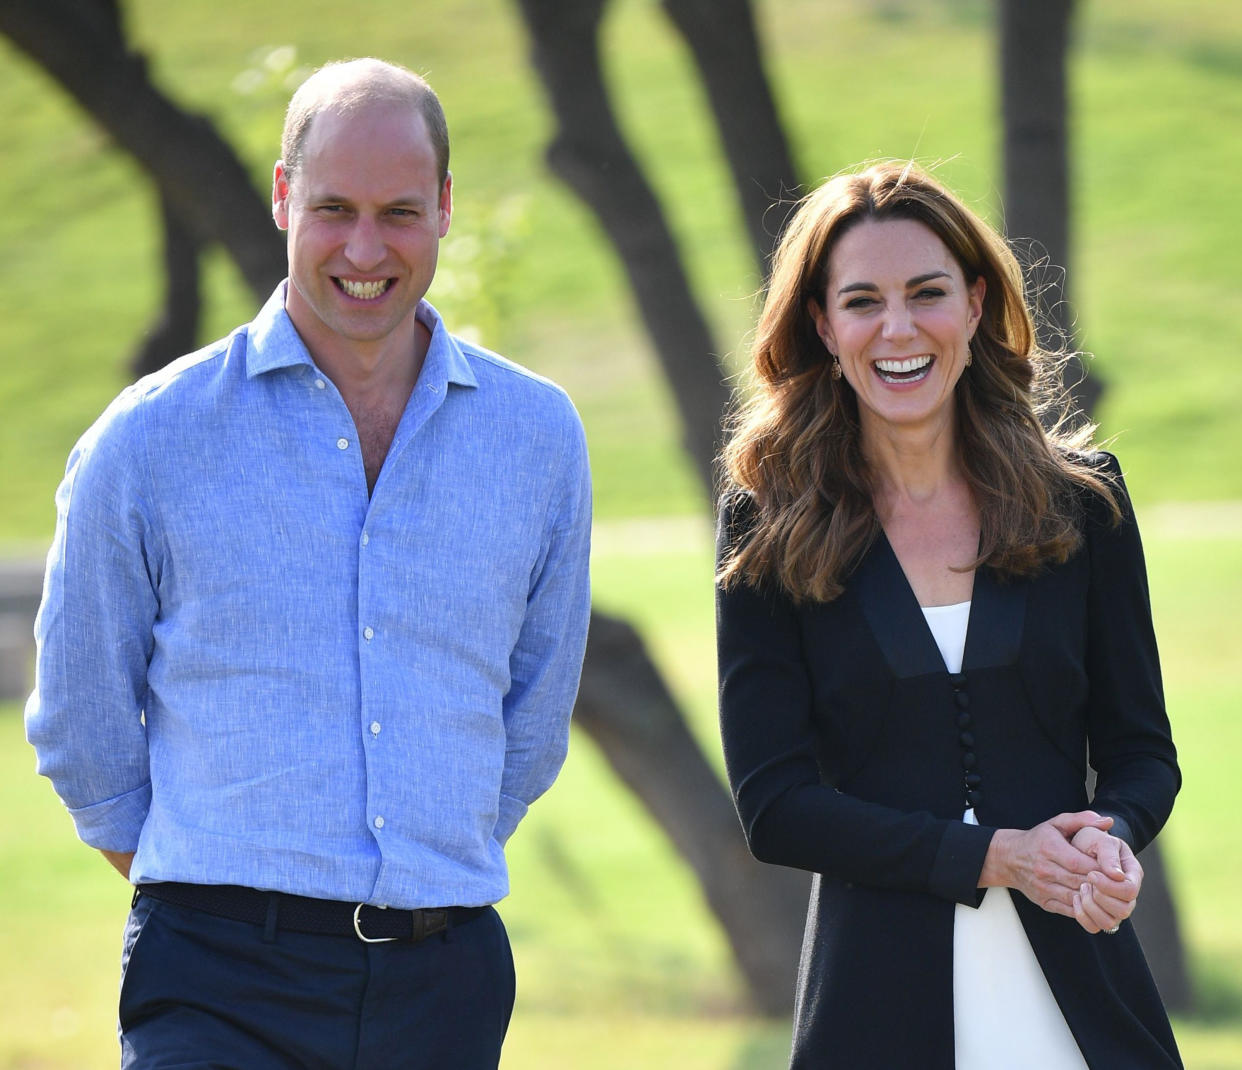 Catherine, Duchess of Cambridge visits an Army Canine Centre with Prince William, Duke of Cambridge, where the UK provides support to a programme that trains dogs to identify explosive devices, during day five of their royal tour of Pakistan on October 18, 2019 in Islamabad, Pakistan.  (Photo by Pool/Samir Hussein/WireImage)